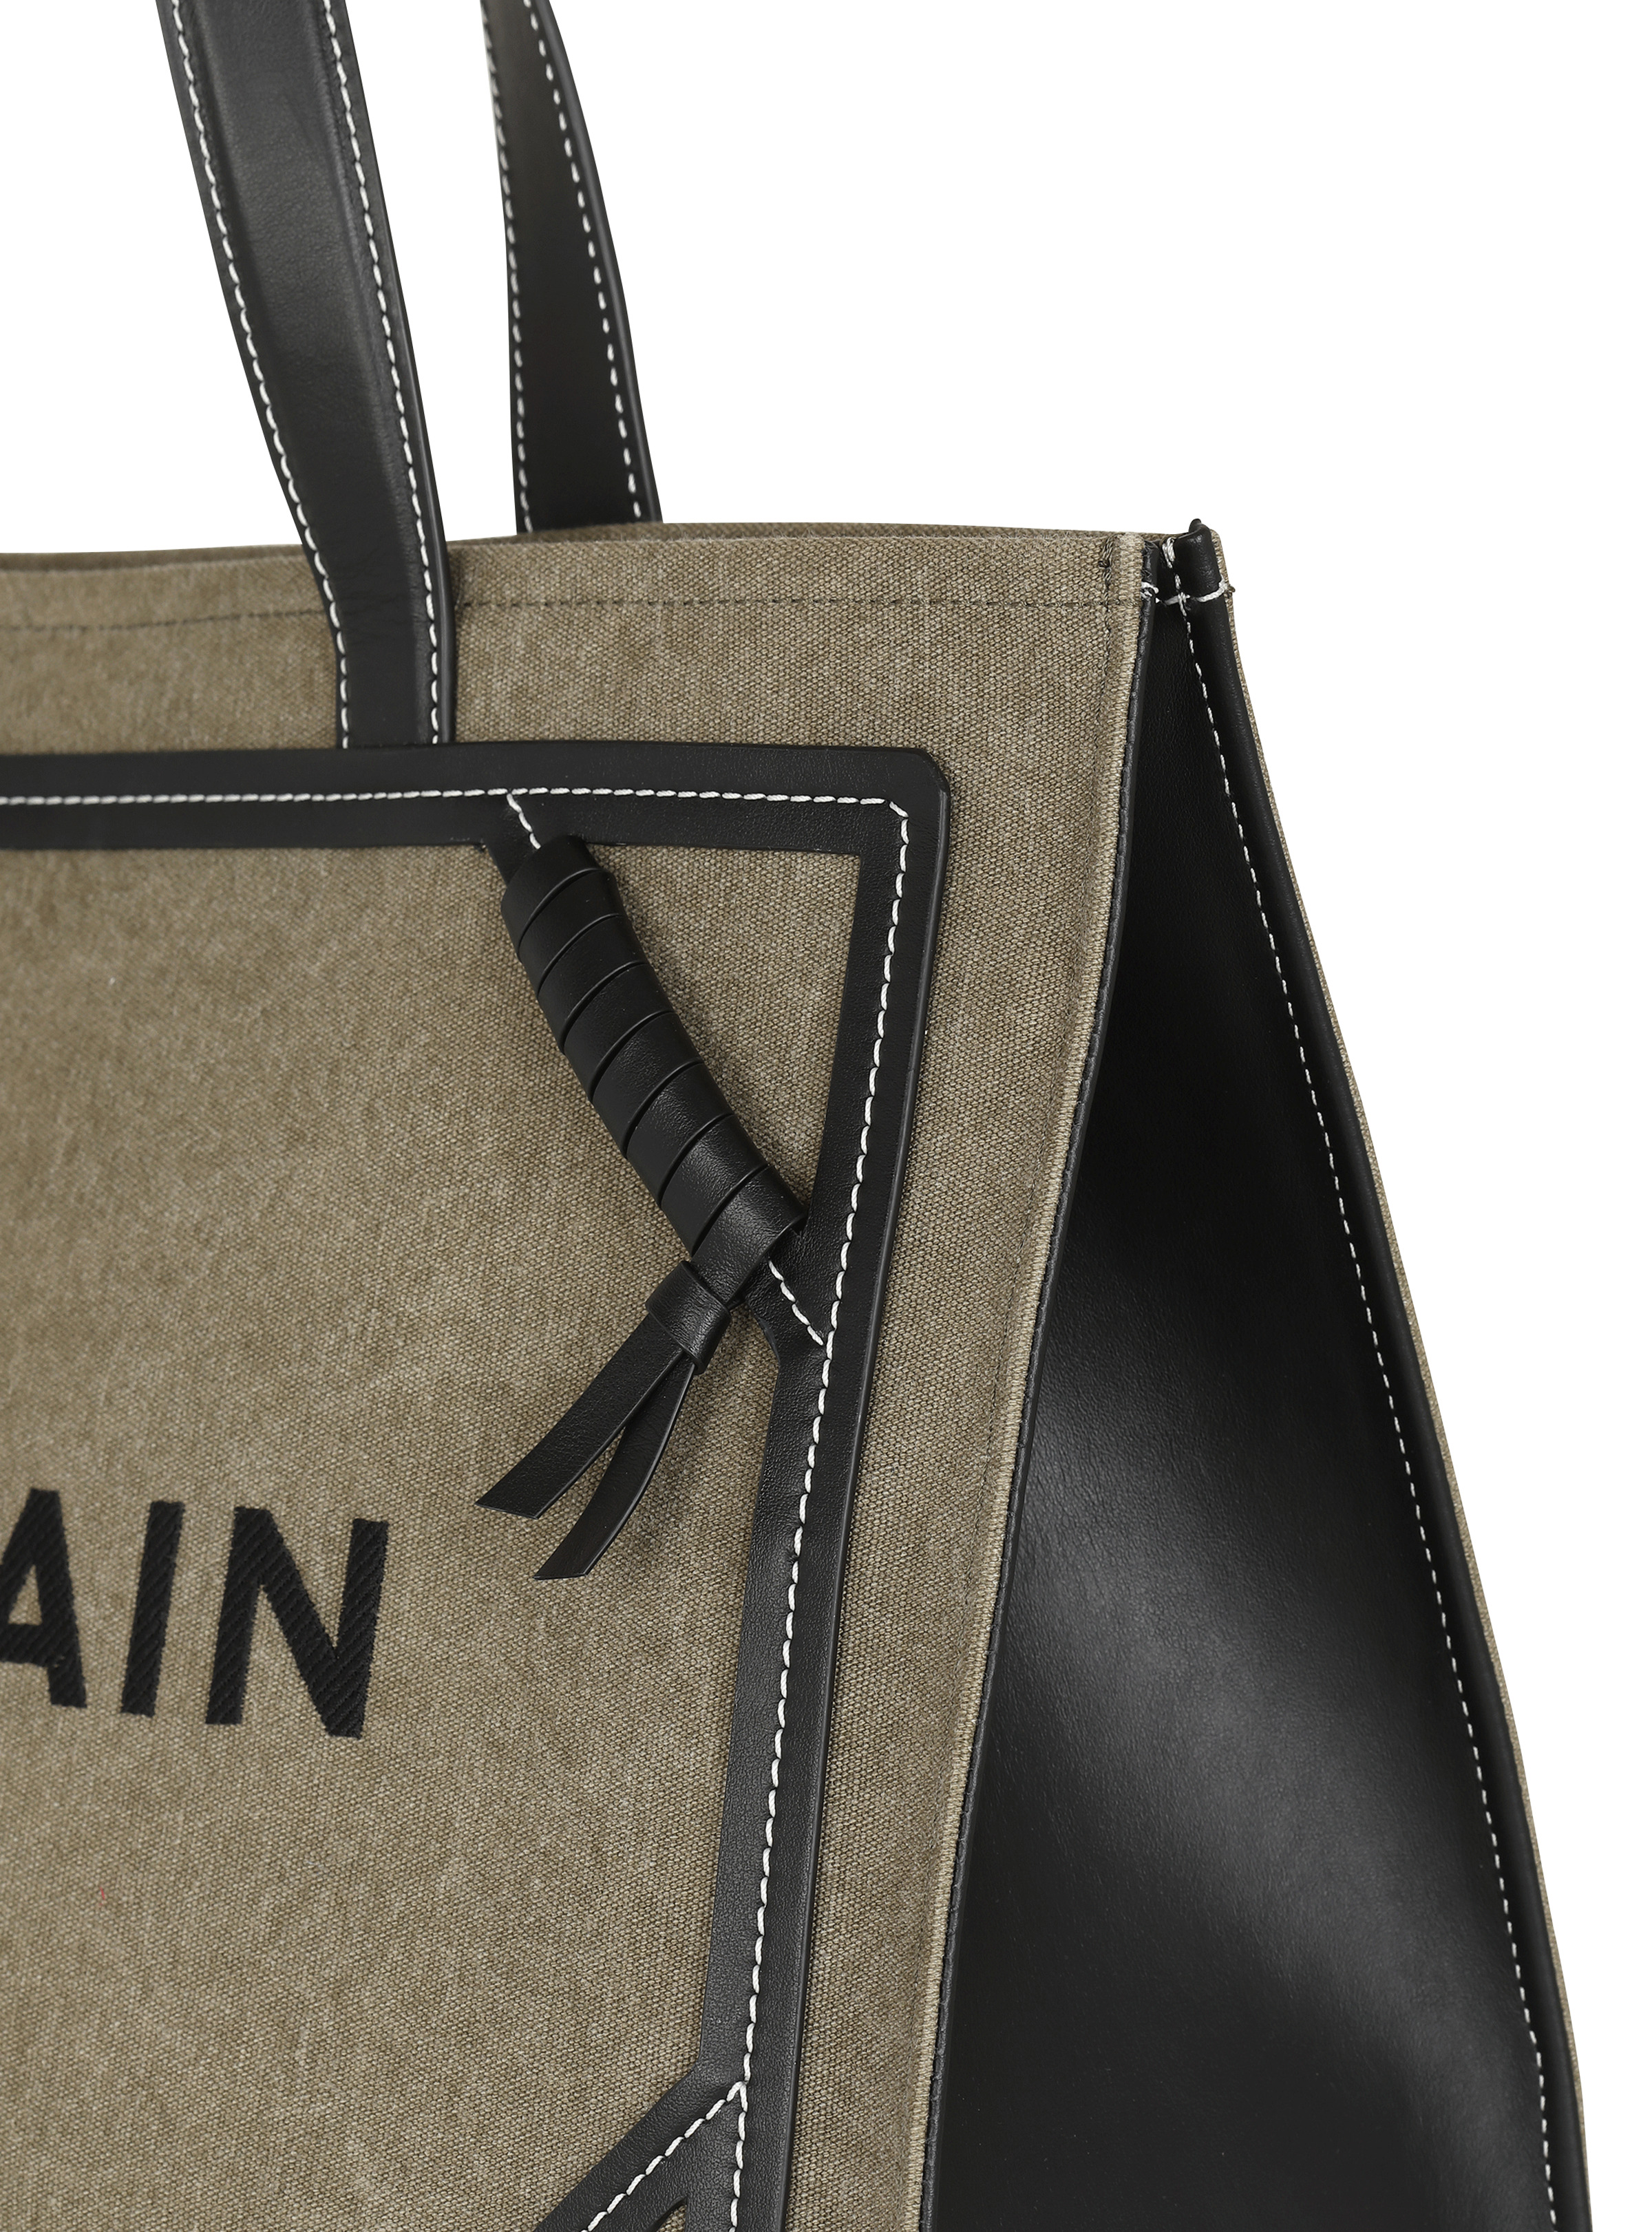 B-Army 42 canvas tote bag with leather details - 5